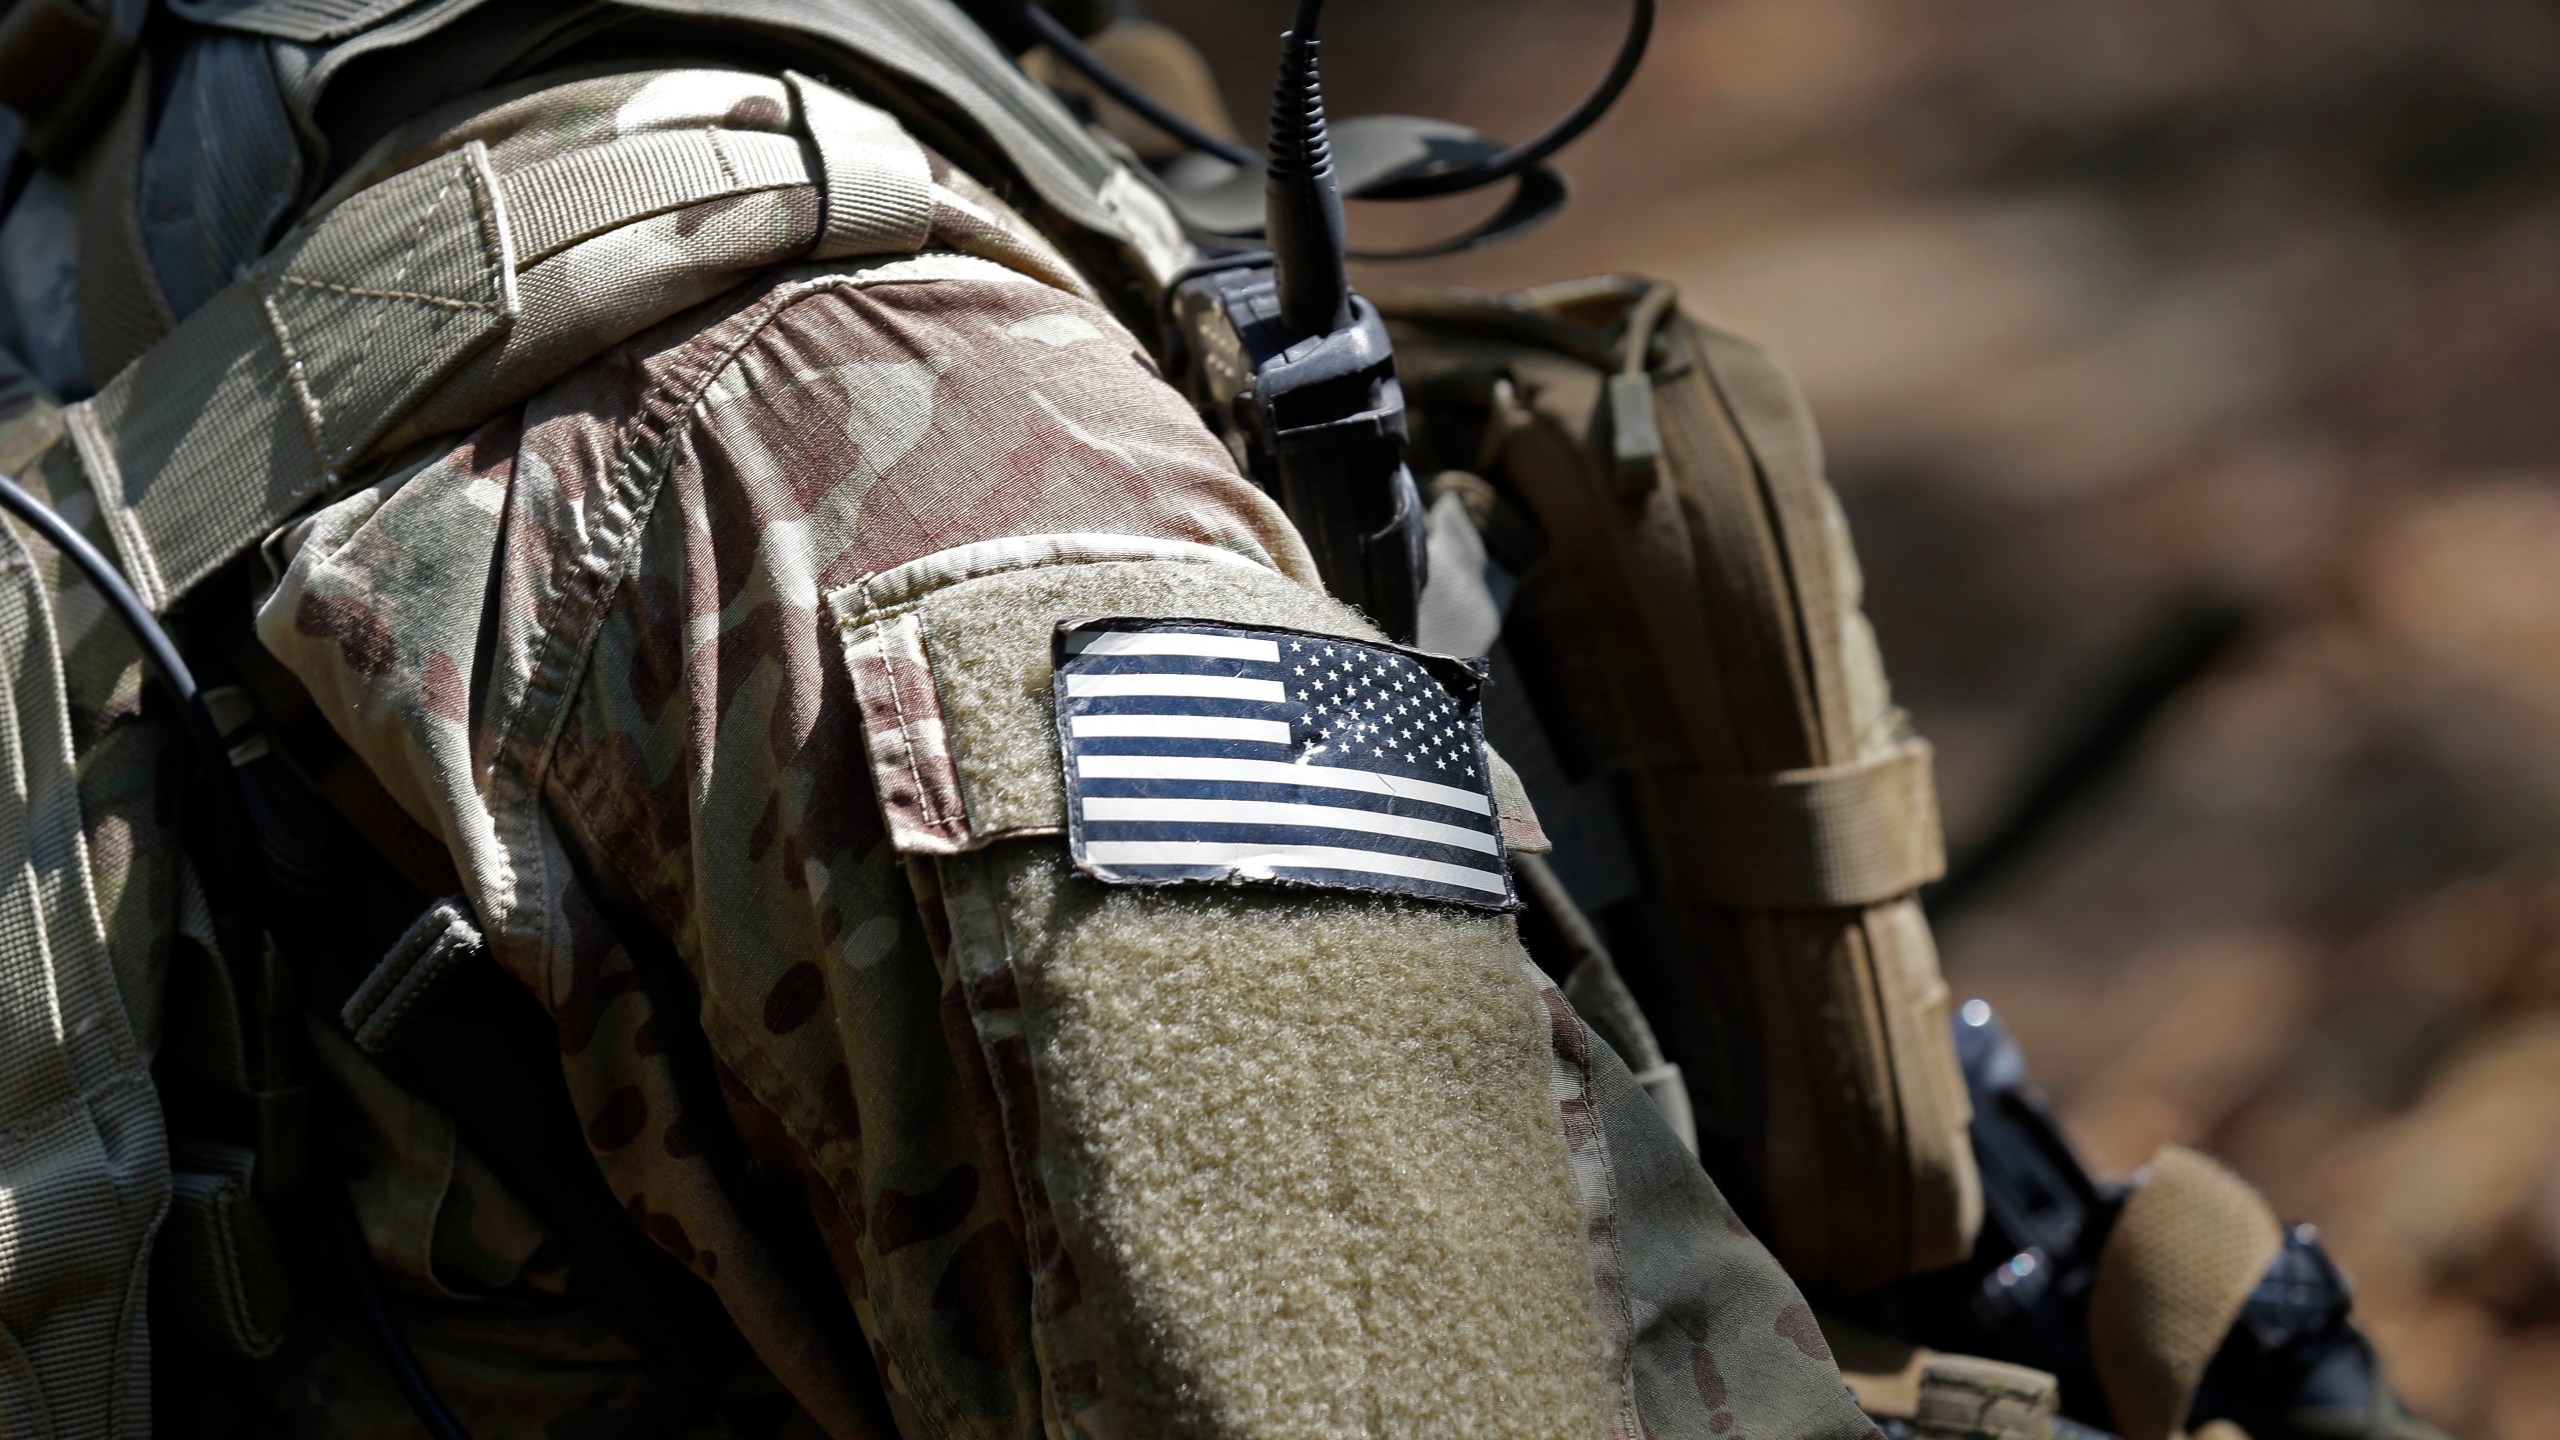 FILE - A U.S. flag patch adorns the uniform of a paratrooper, April 21, 2017, during a training exercise at Fort Bragg, N.C. Fifteen current or retired Joint Base Lewis-McChord servicemen who say the Army failed to protect them from a military doctor who's been charged with sexual abuse are seeking $5 million in damages for the emotional distress they say they've suffered. (AP Photo/Gerry Broome, File)